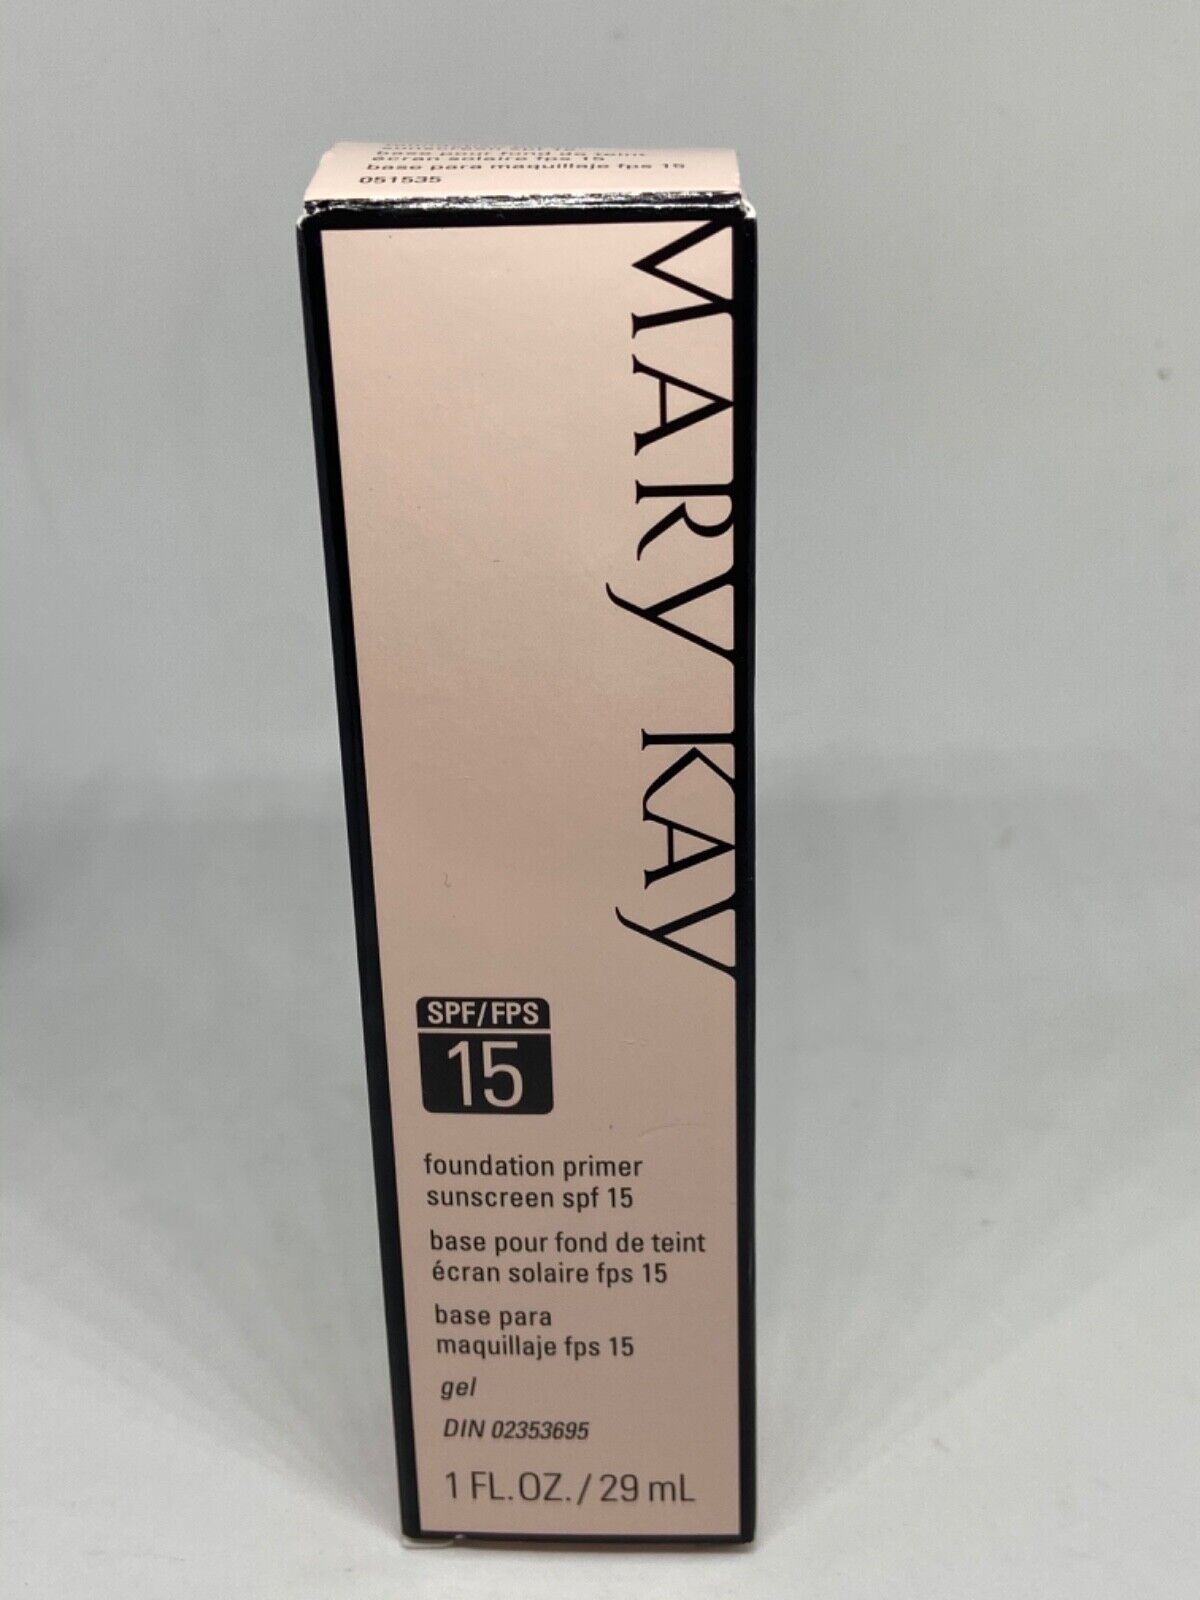 Mary Kay Free shipping / New FOUNDATION PRIMER SUNSCREEN BROAD 15 Limited time for free shipping FREE Spectrum SPF